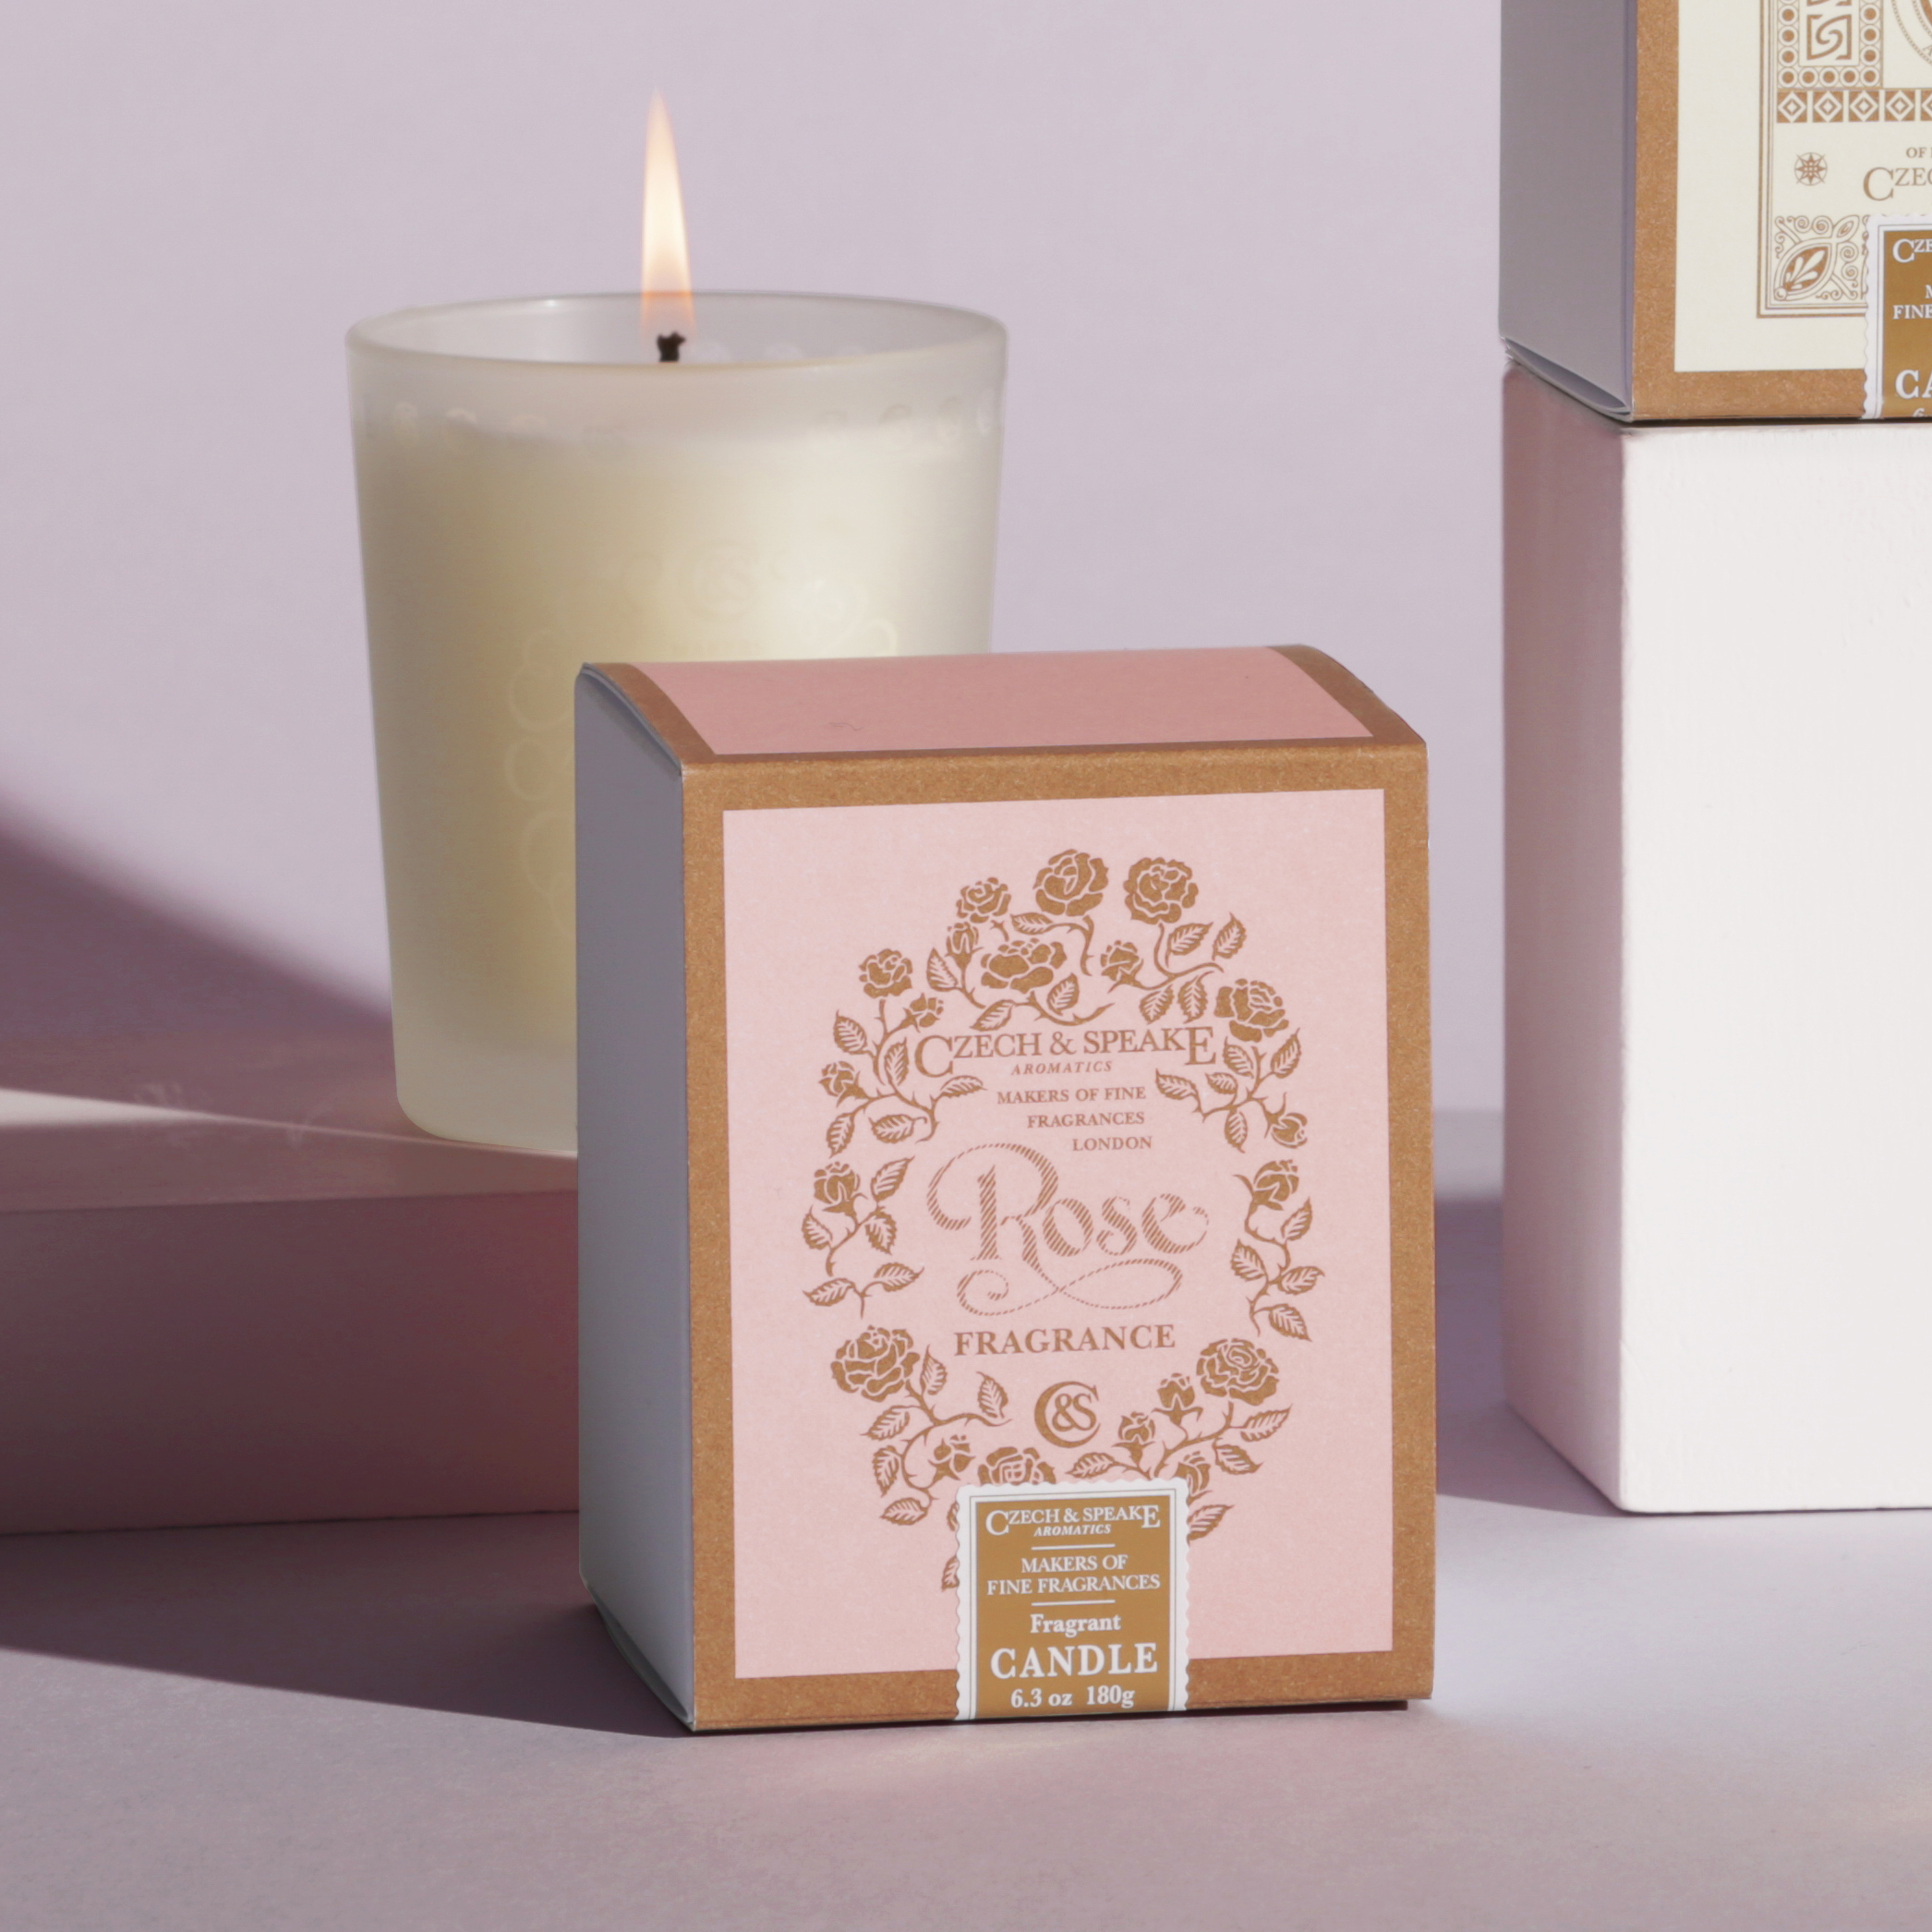 Czech & Speake Rose Candle with packaging on pink background